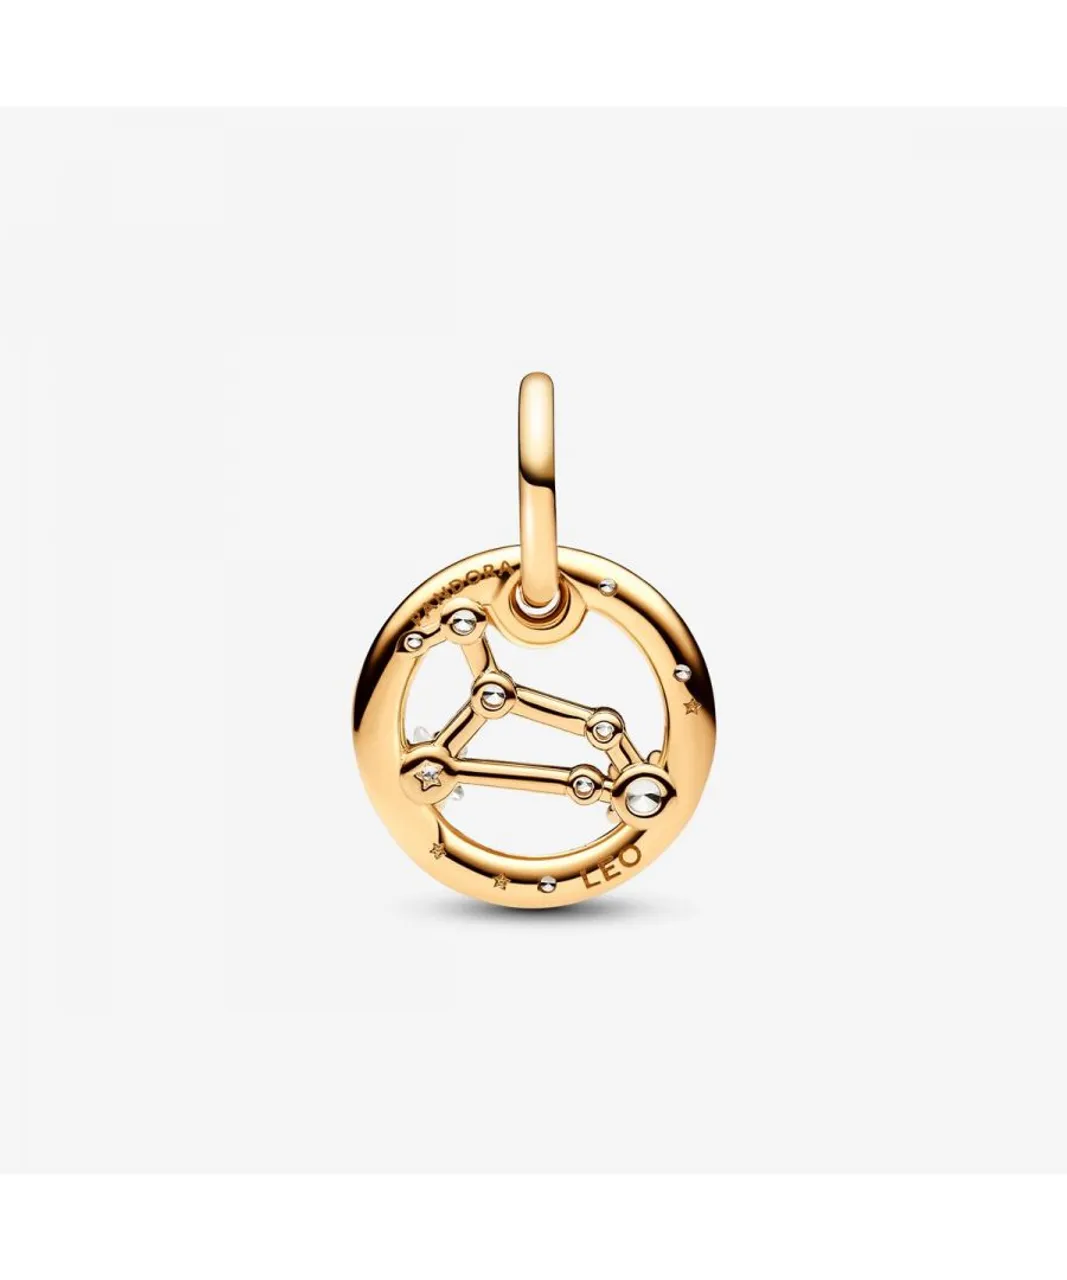 Pandora 'Zodiac Sign' WoMens Gold Plated Metal Charm - 762725C01 Gold Tone - One Size